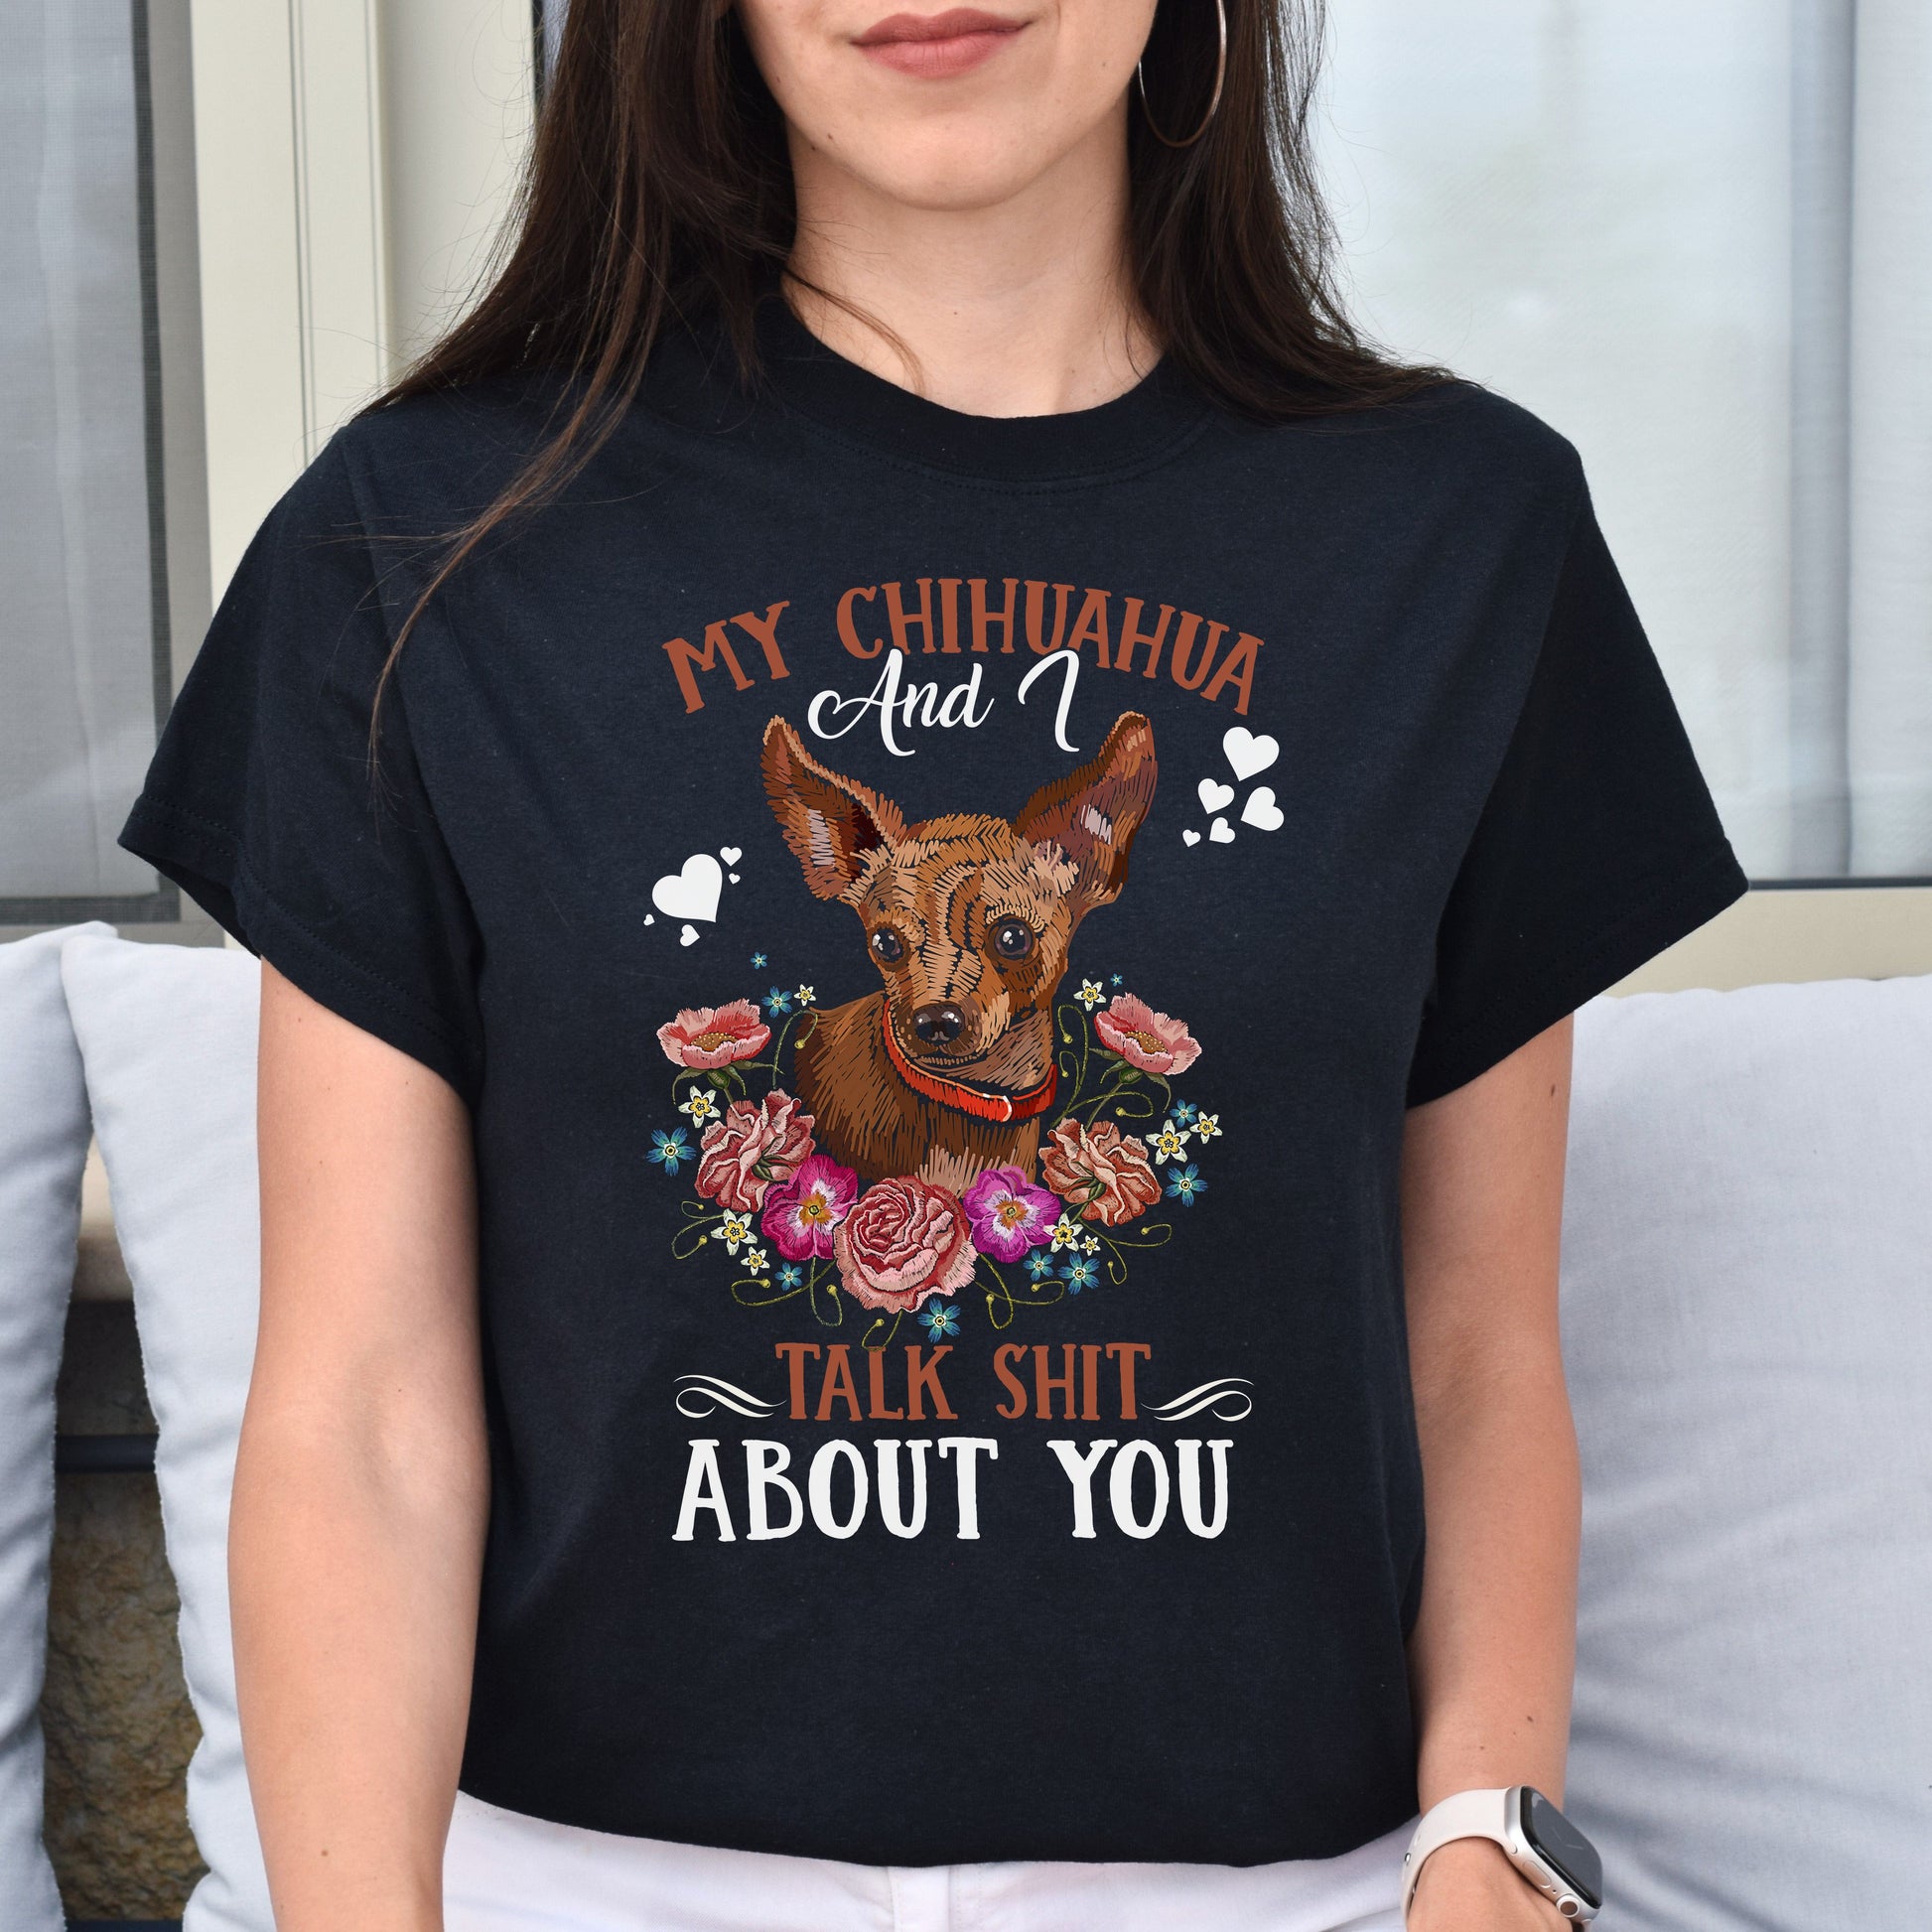 My chihuahua and I talk shit about you Unisex t-shirt gift black navy dark heather-Black-Family-Gift-Planet